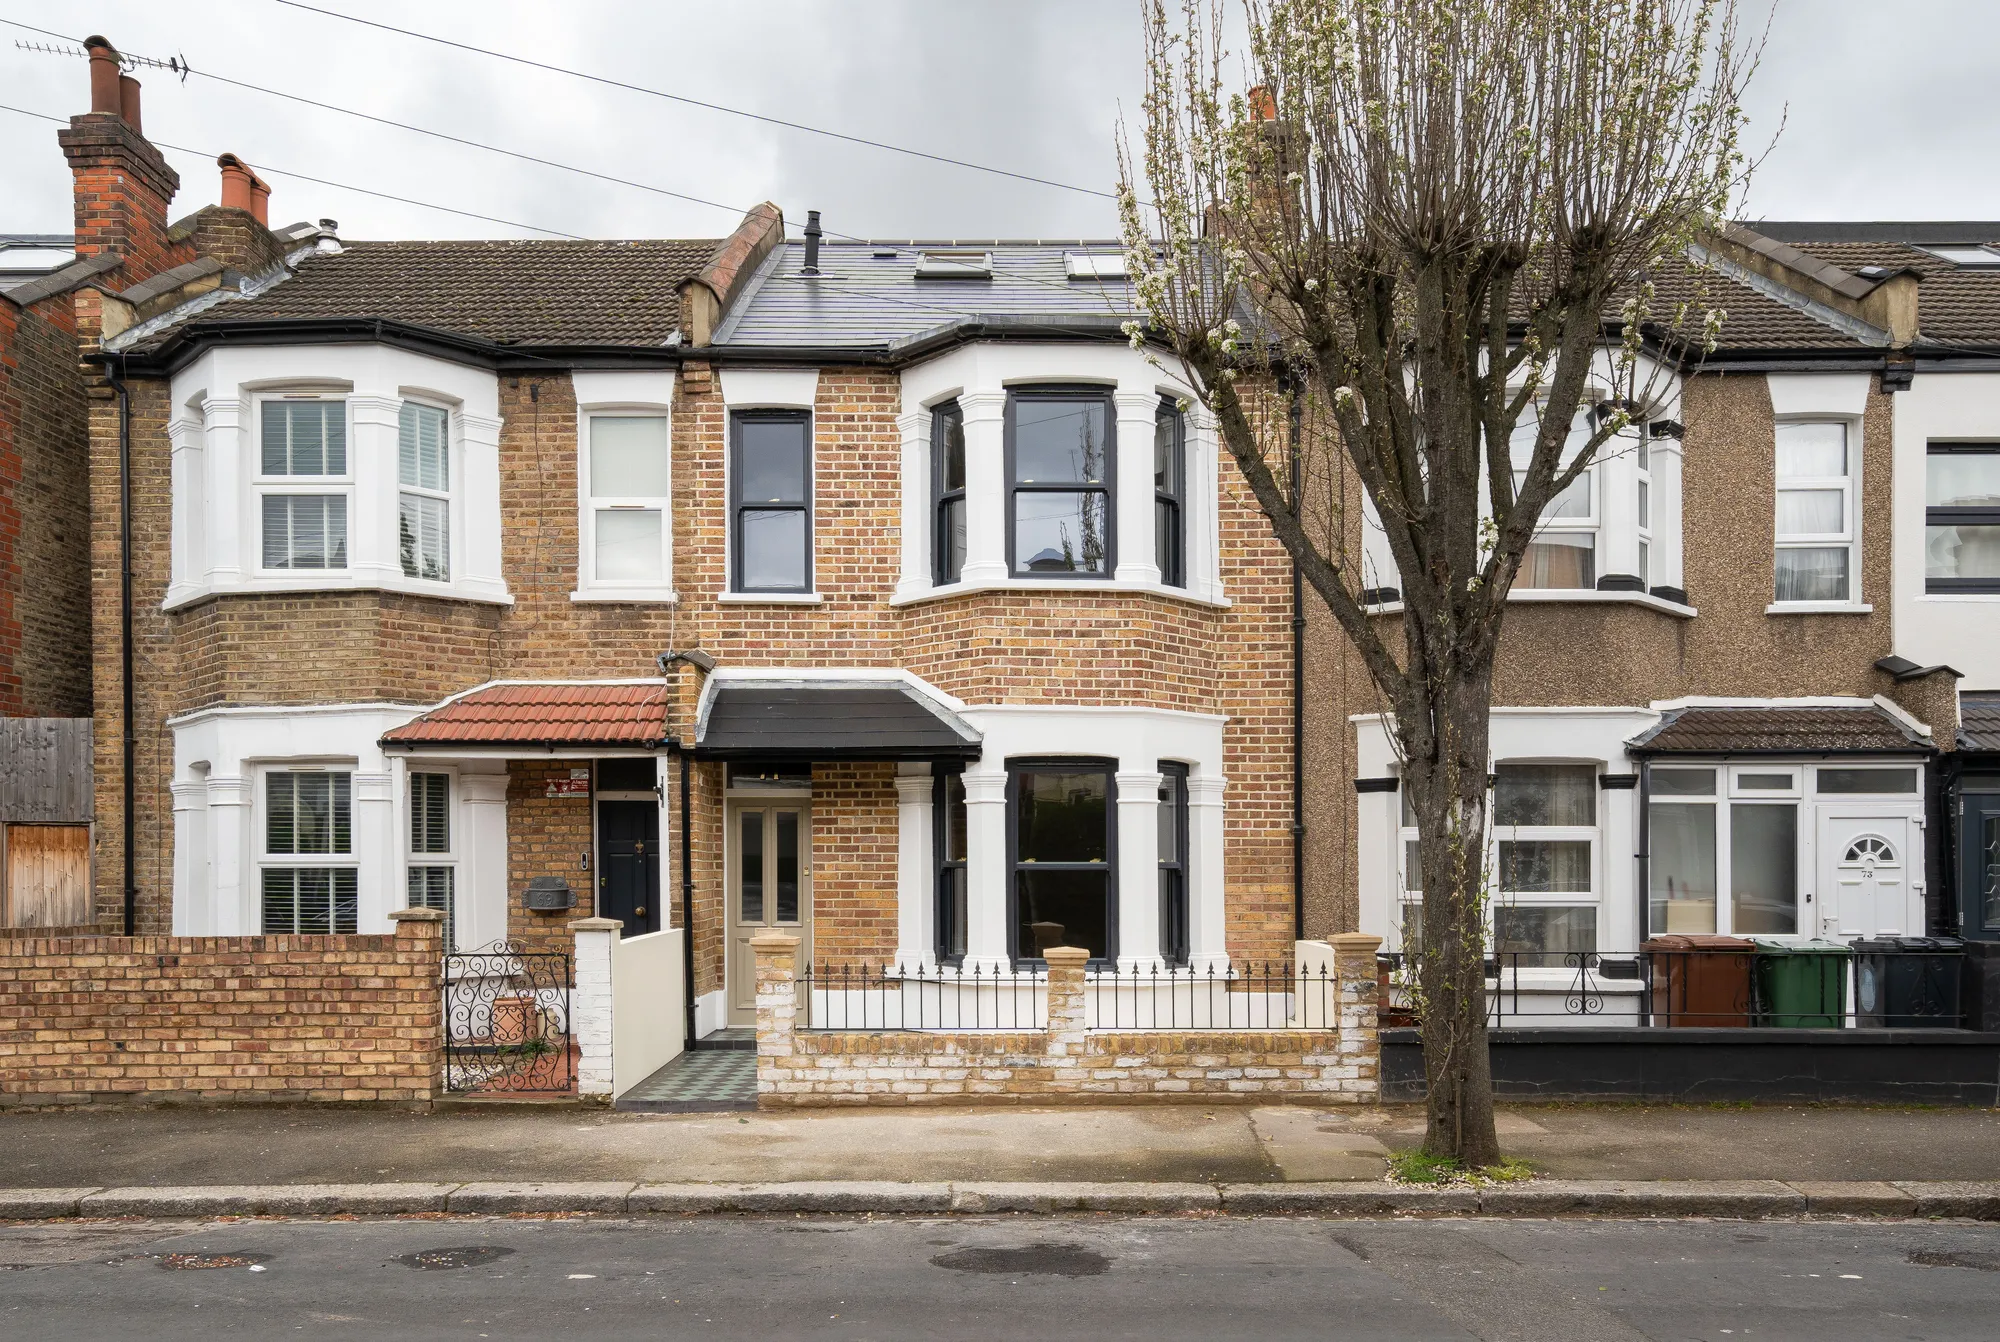 4 bed mid-terraced house for sale in Morley Road, Leyton - Property Image 1